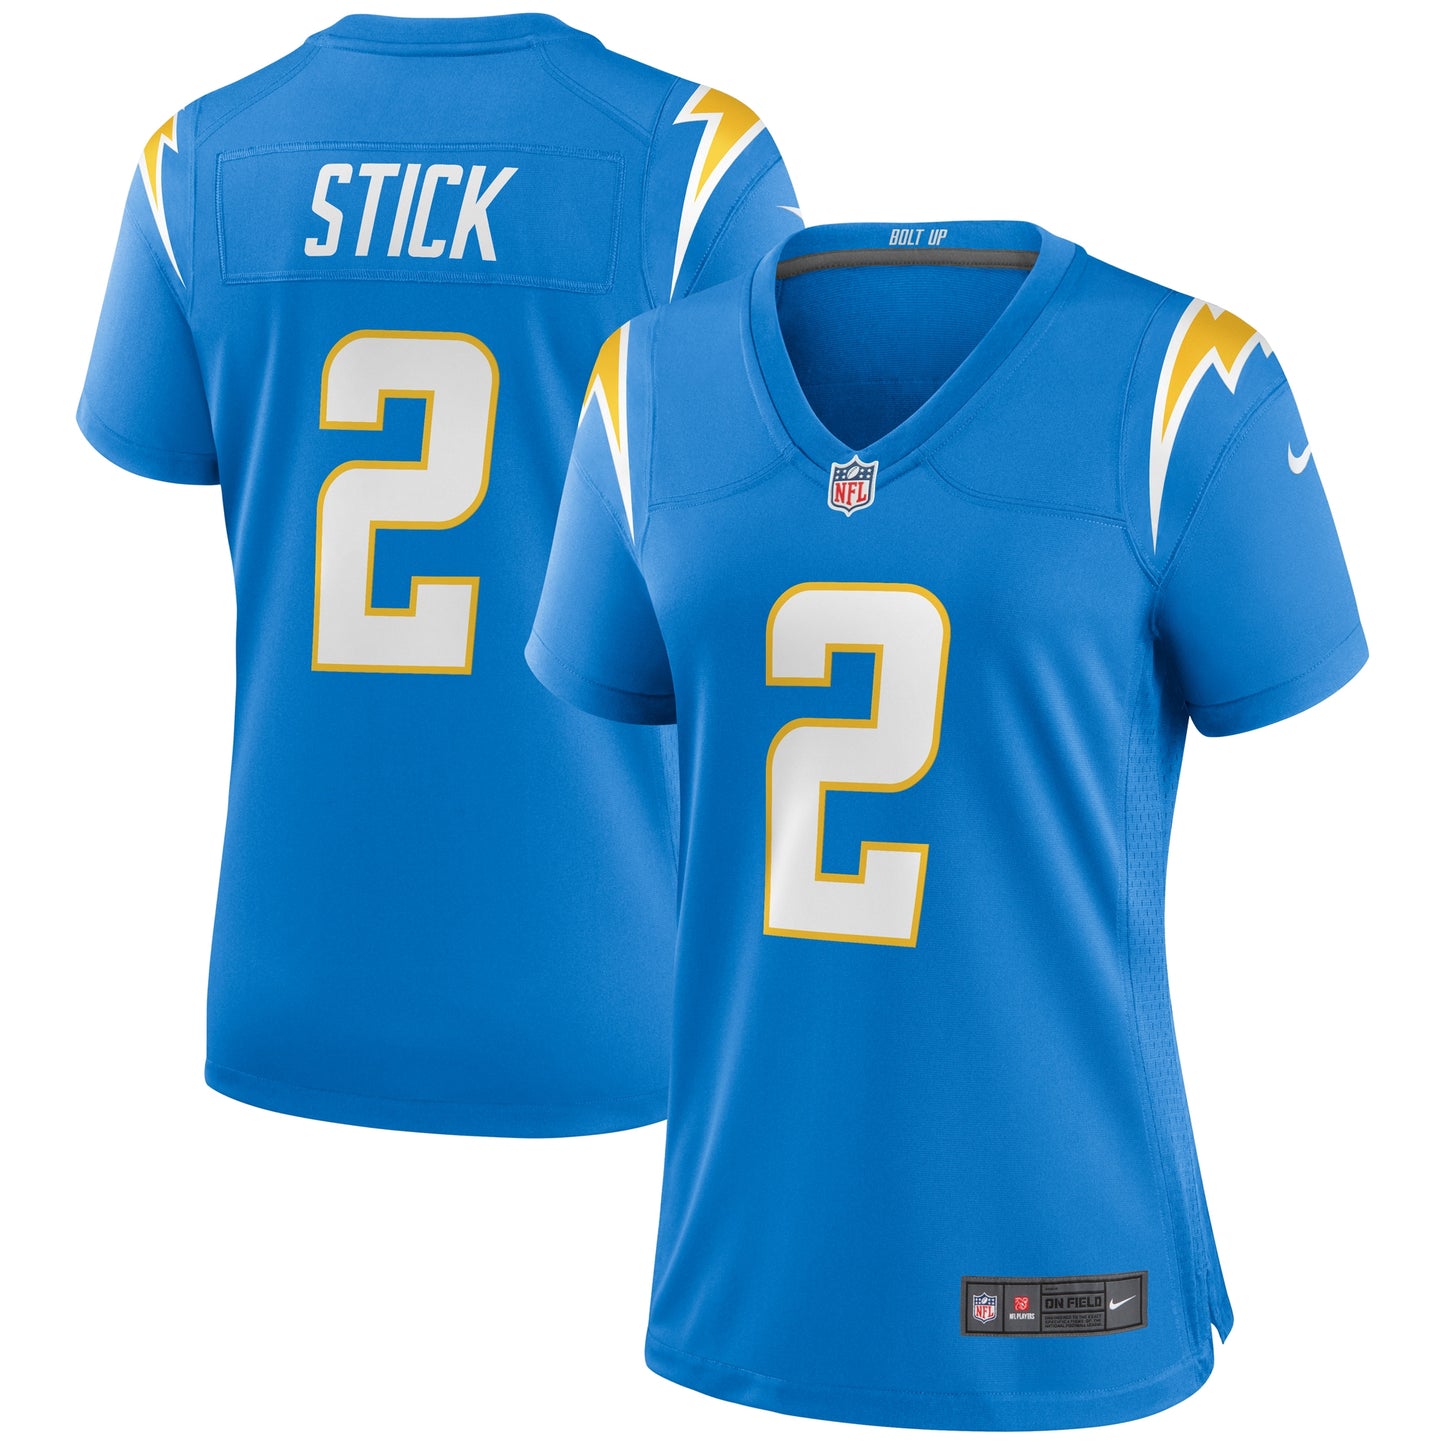 Easton Stick Los Angeles Chargers Nike Women's Game Jersey - Powder Blue